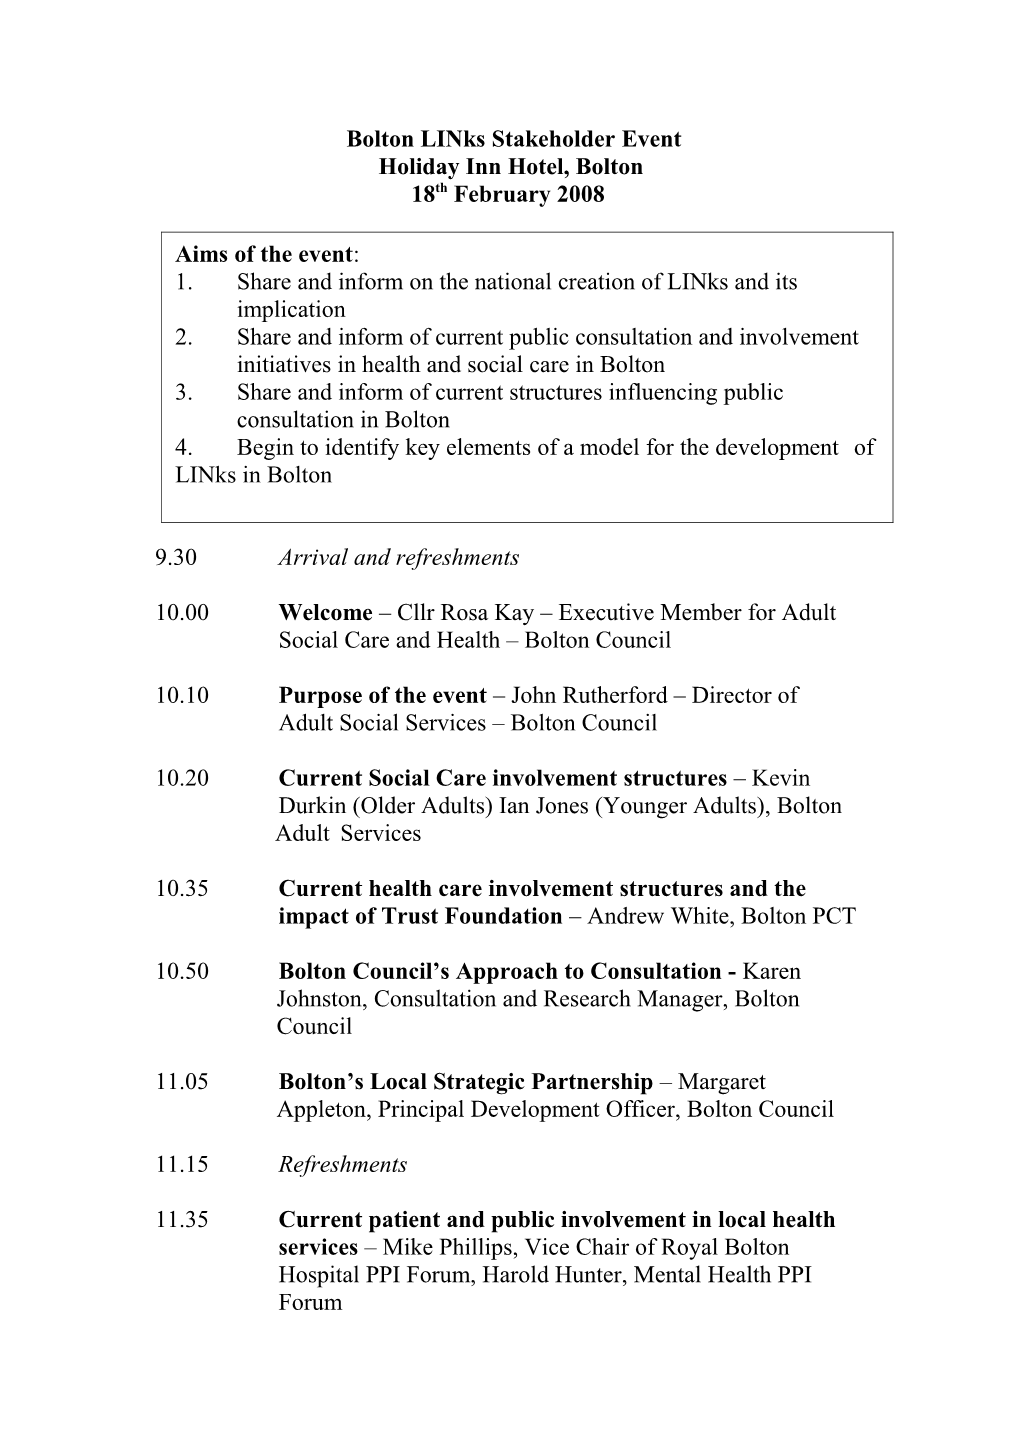 Links Stakeholder Conference Event Programme (18Th February 2008 )